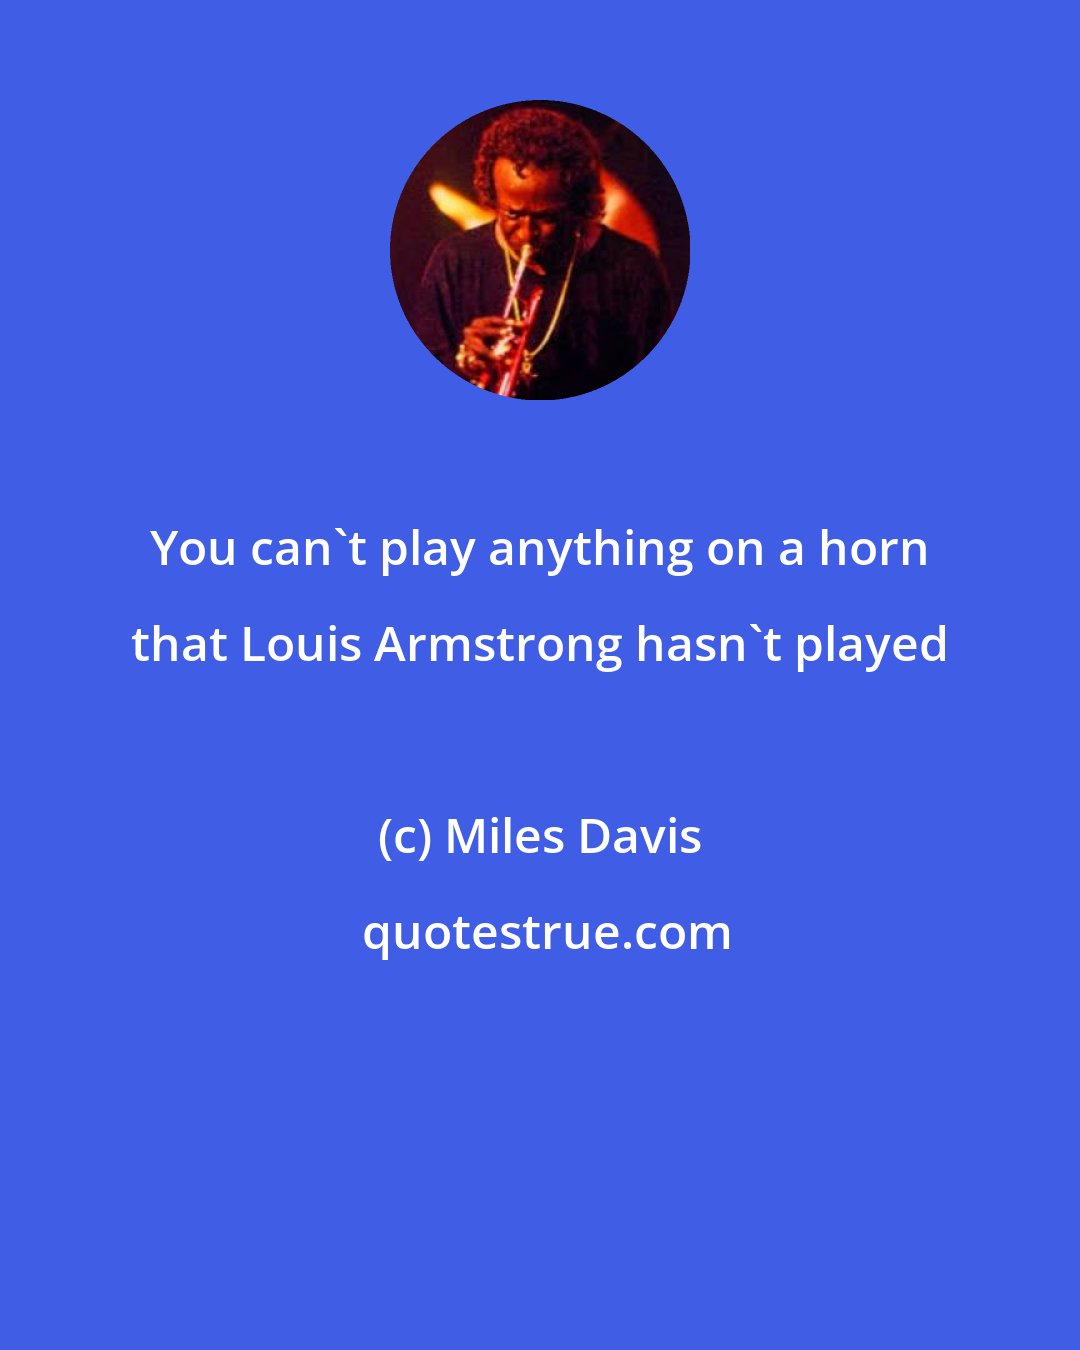 Miles Davis: You can't play anything on a horn that Louis Armstrong hasn't played